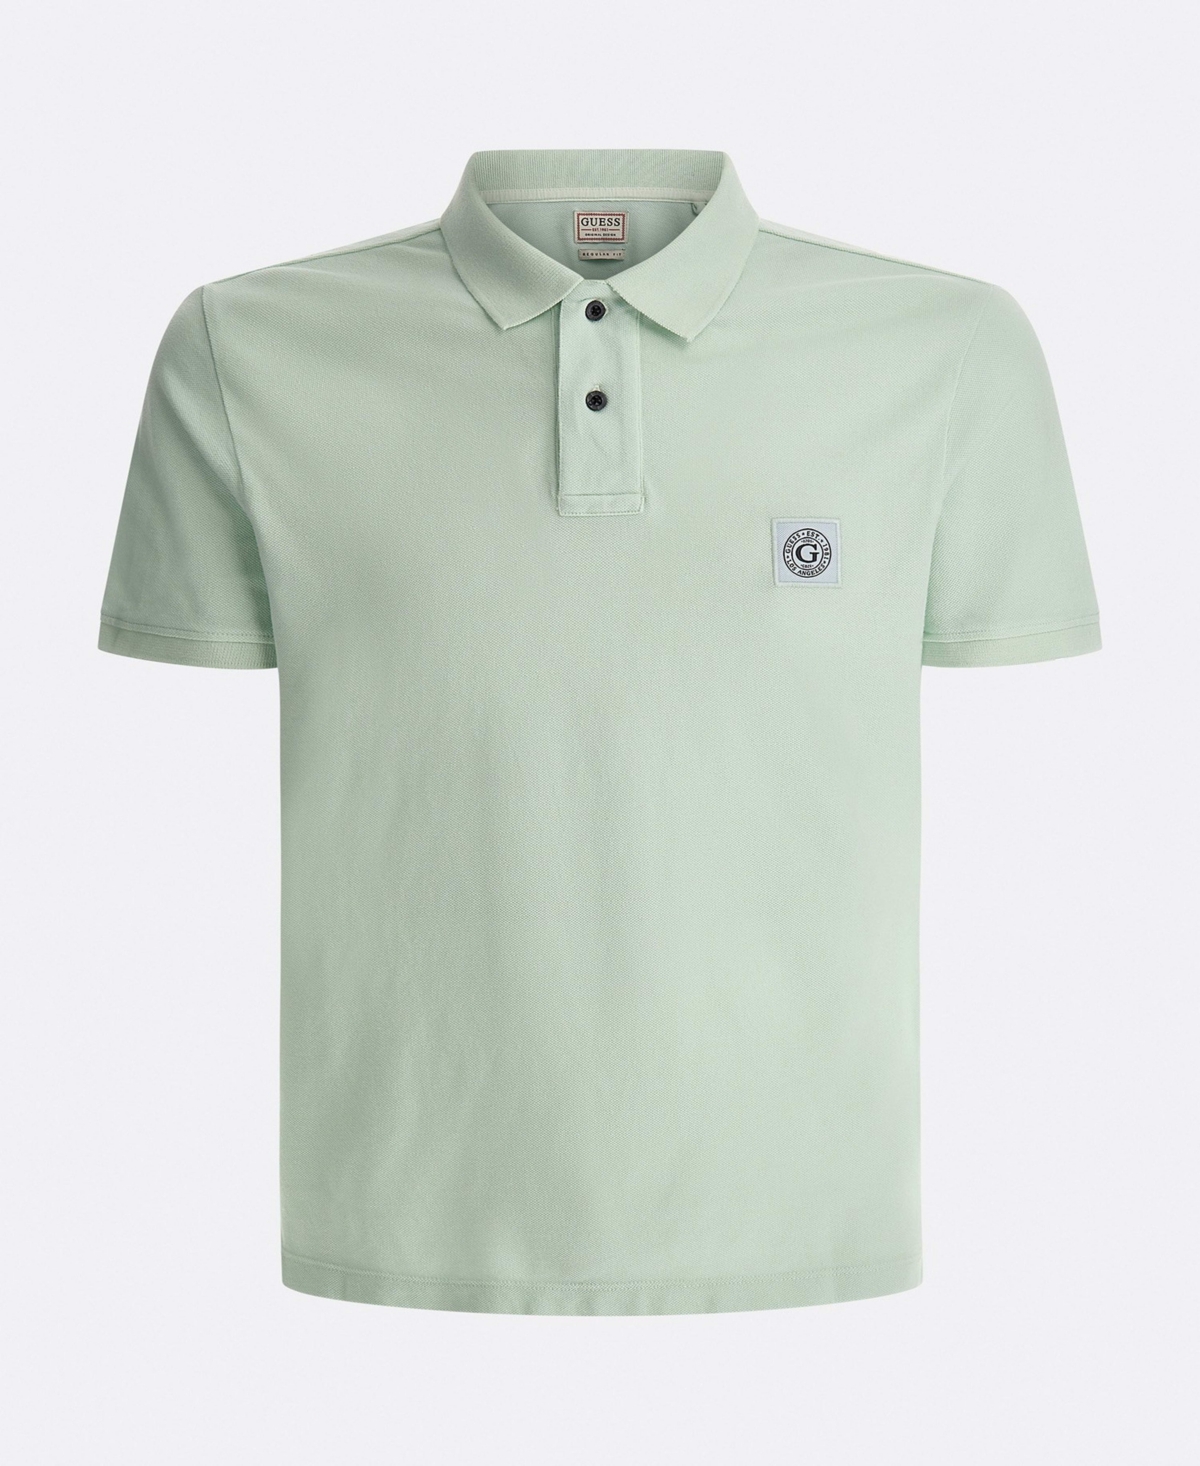 Guess Men's Washed Polo Shirt In Matcha Dust